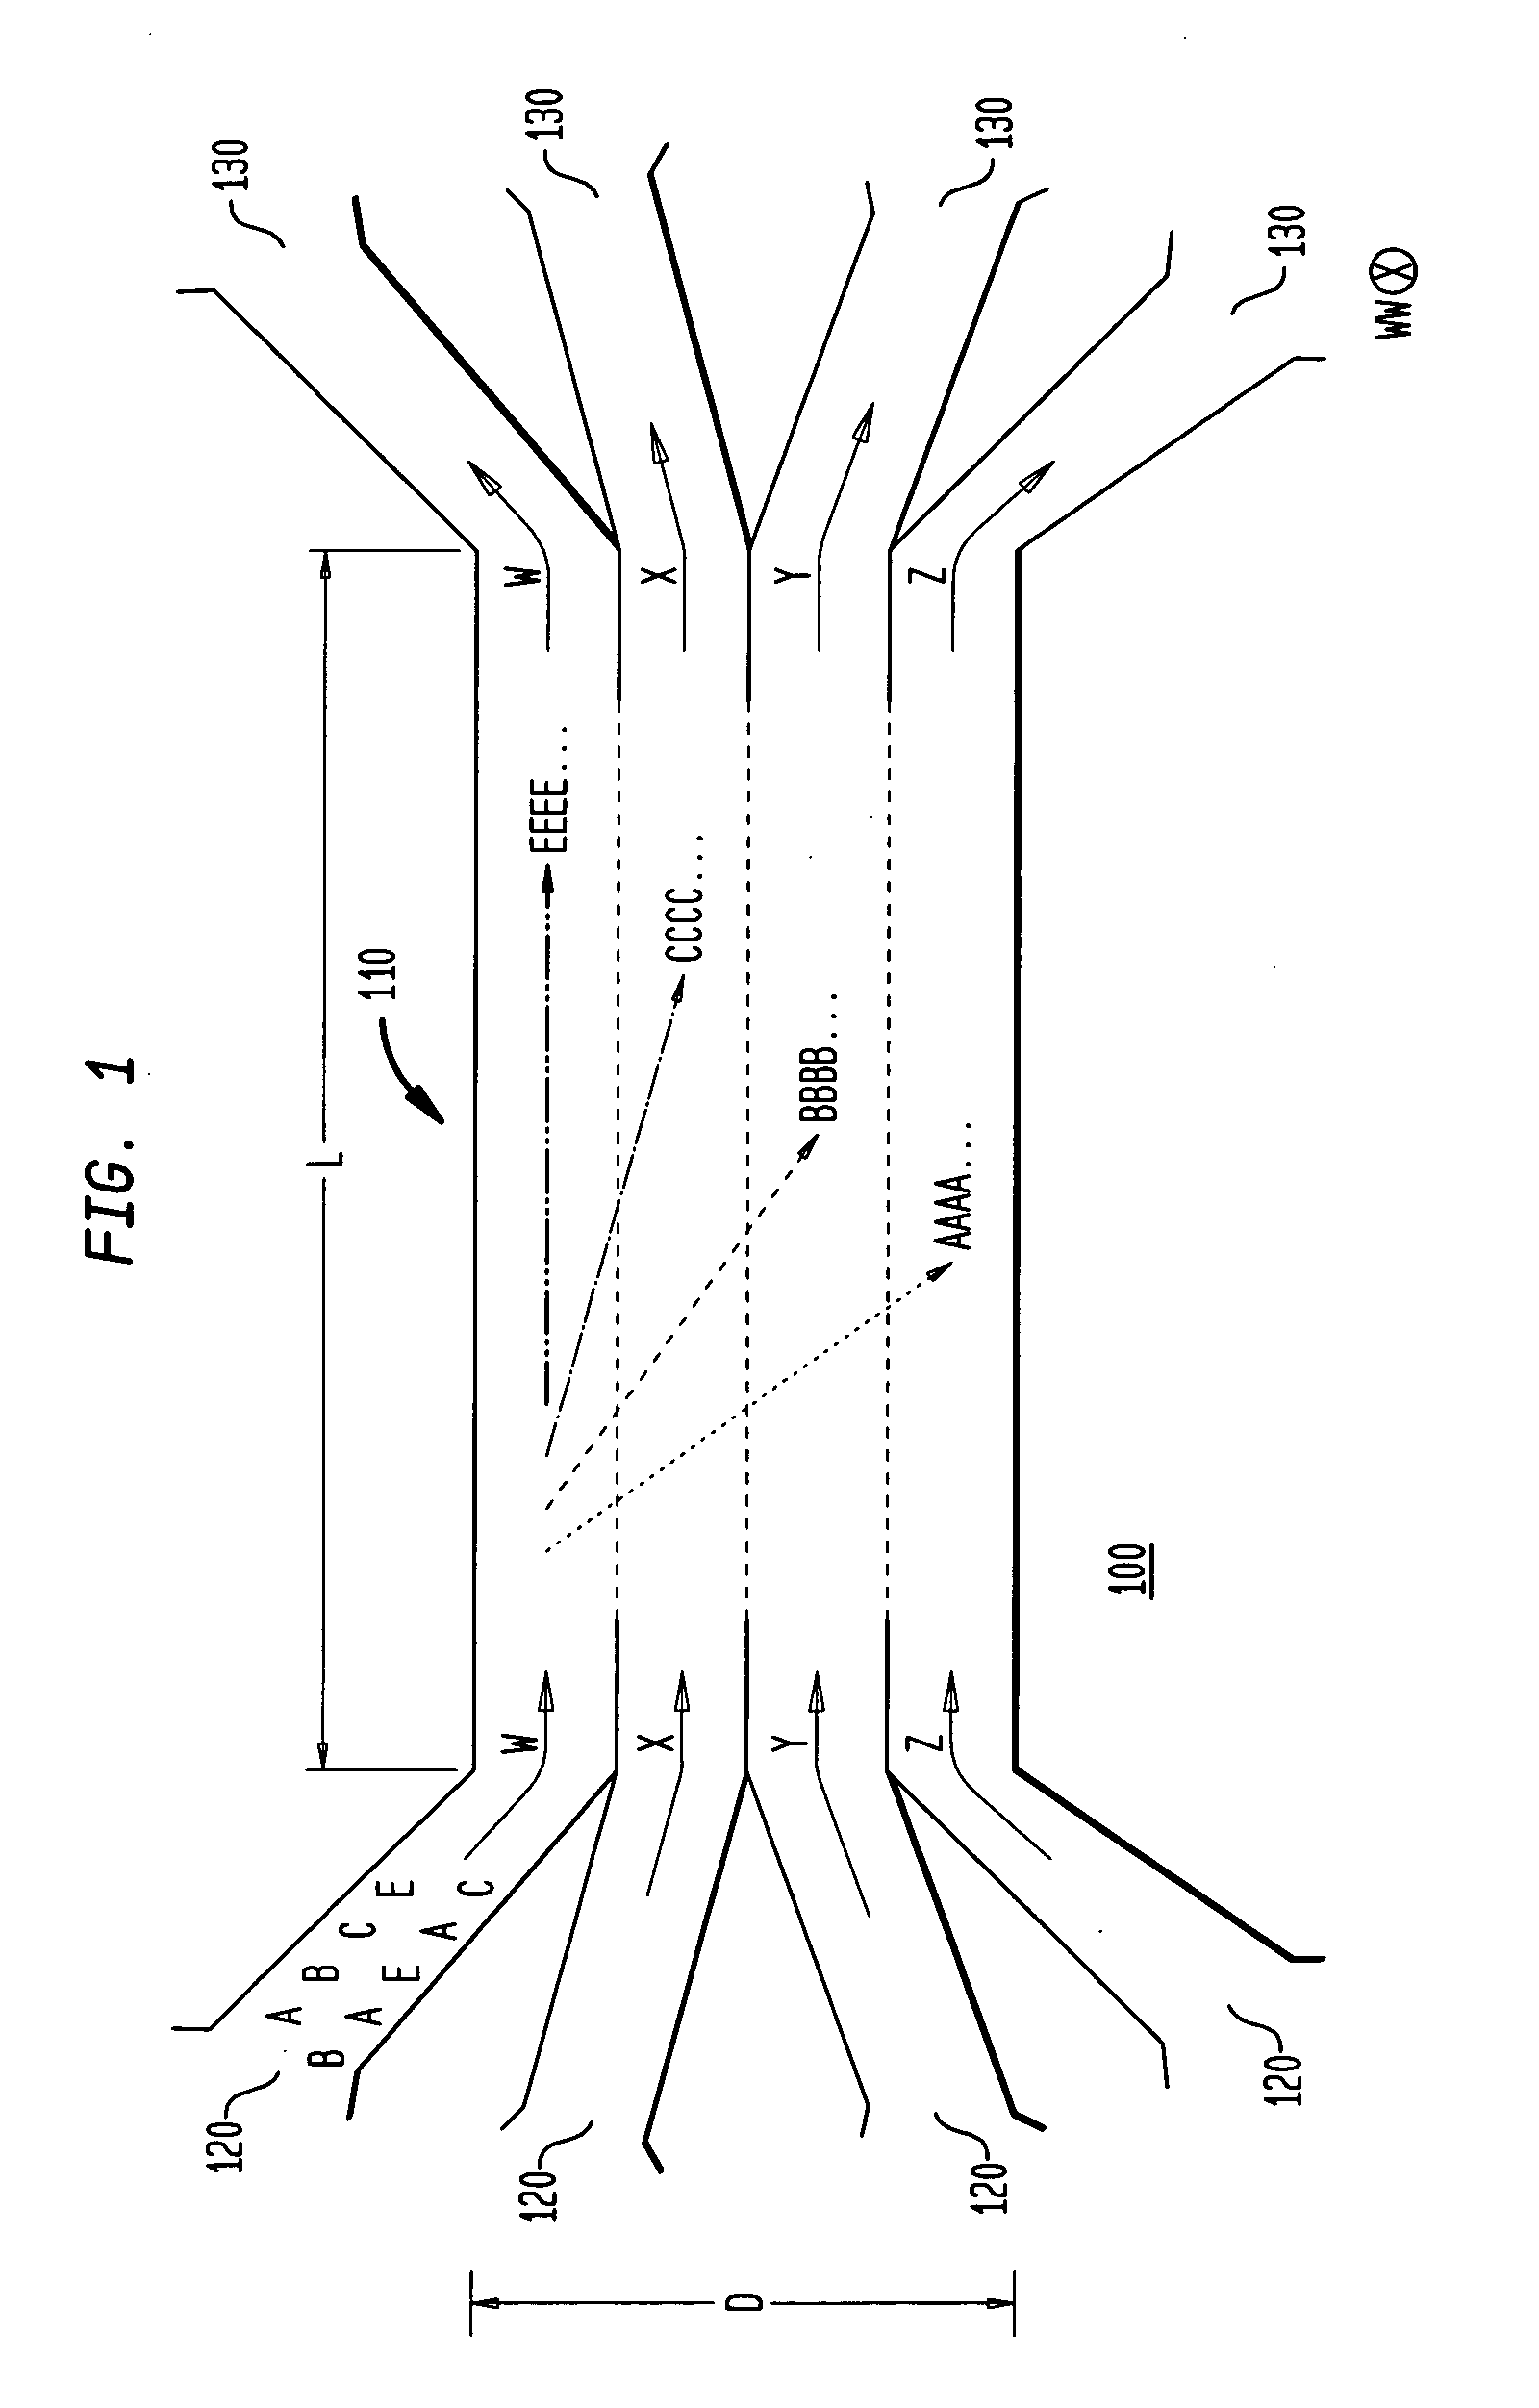 Multiple laminar flow-based particle and cellular separation with laser steering